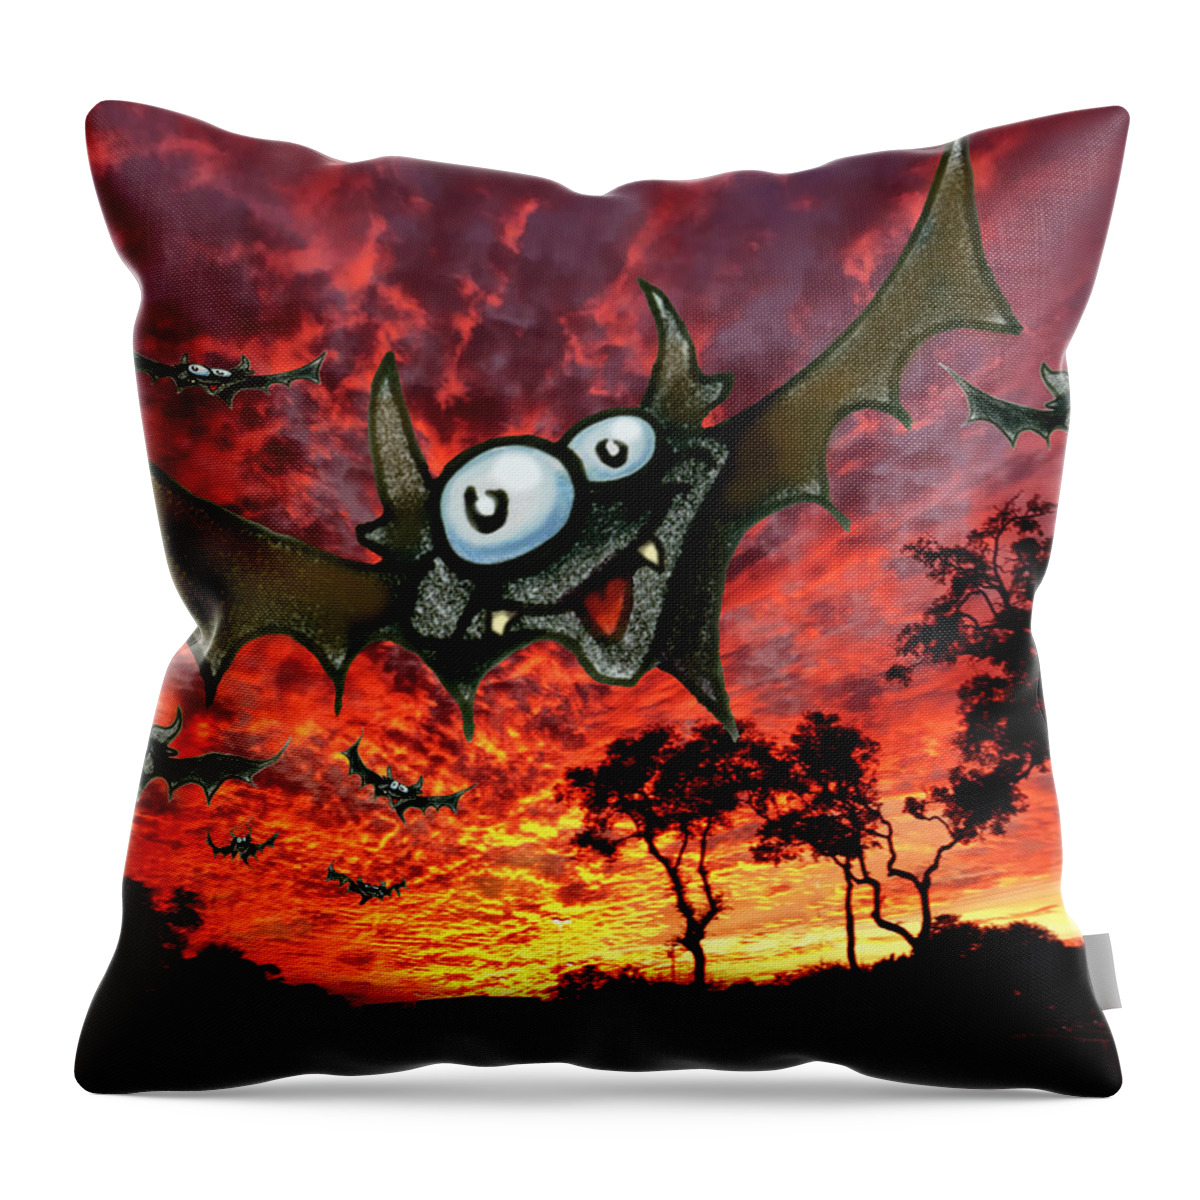 Bat Throw Pillow featuring the digital art Bats at Sunset by Kevin Middleton